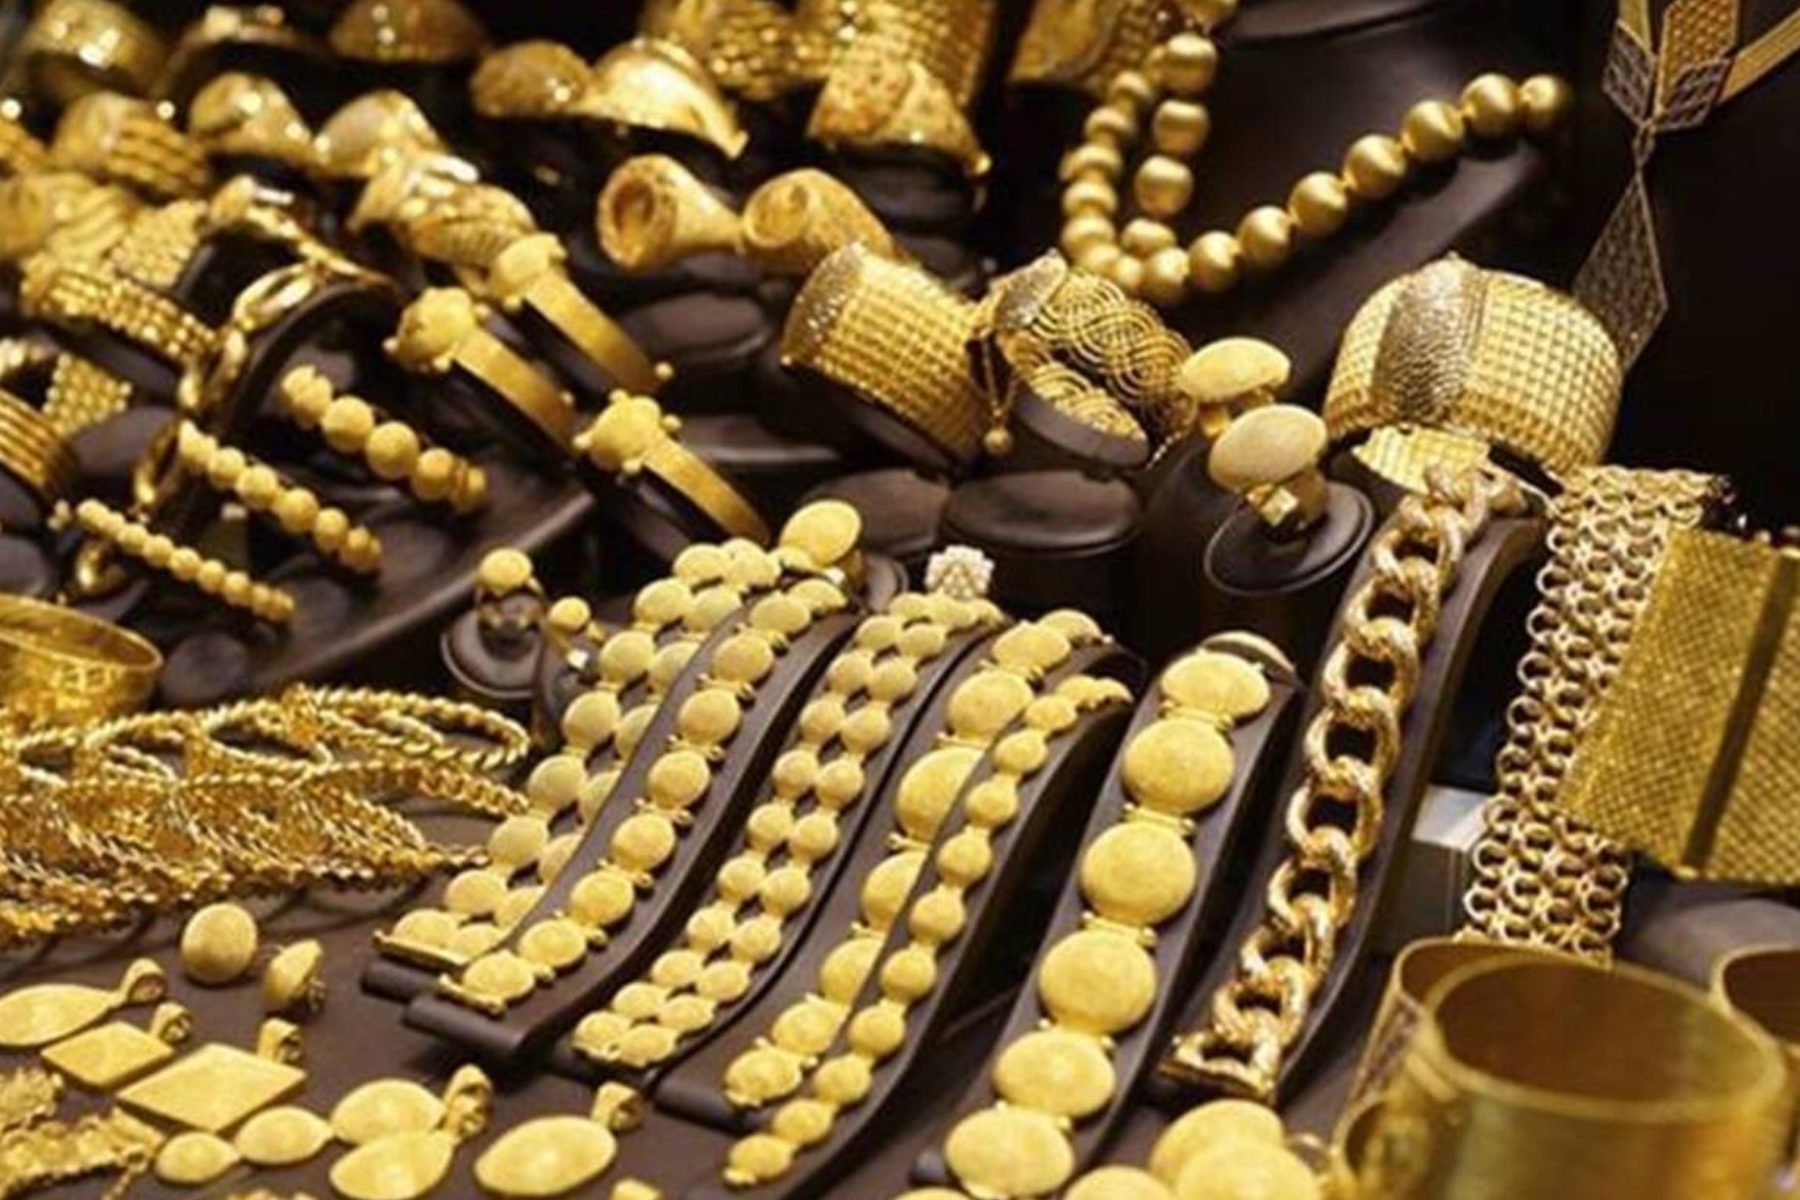 Sale Of Gold Jewellery Hallmarked Without 6-digit Code To Be Banned After March 31